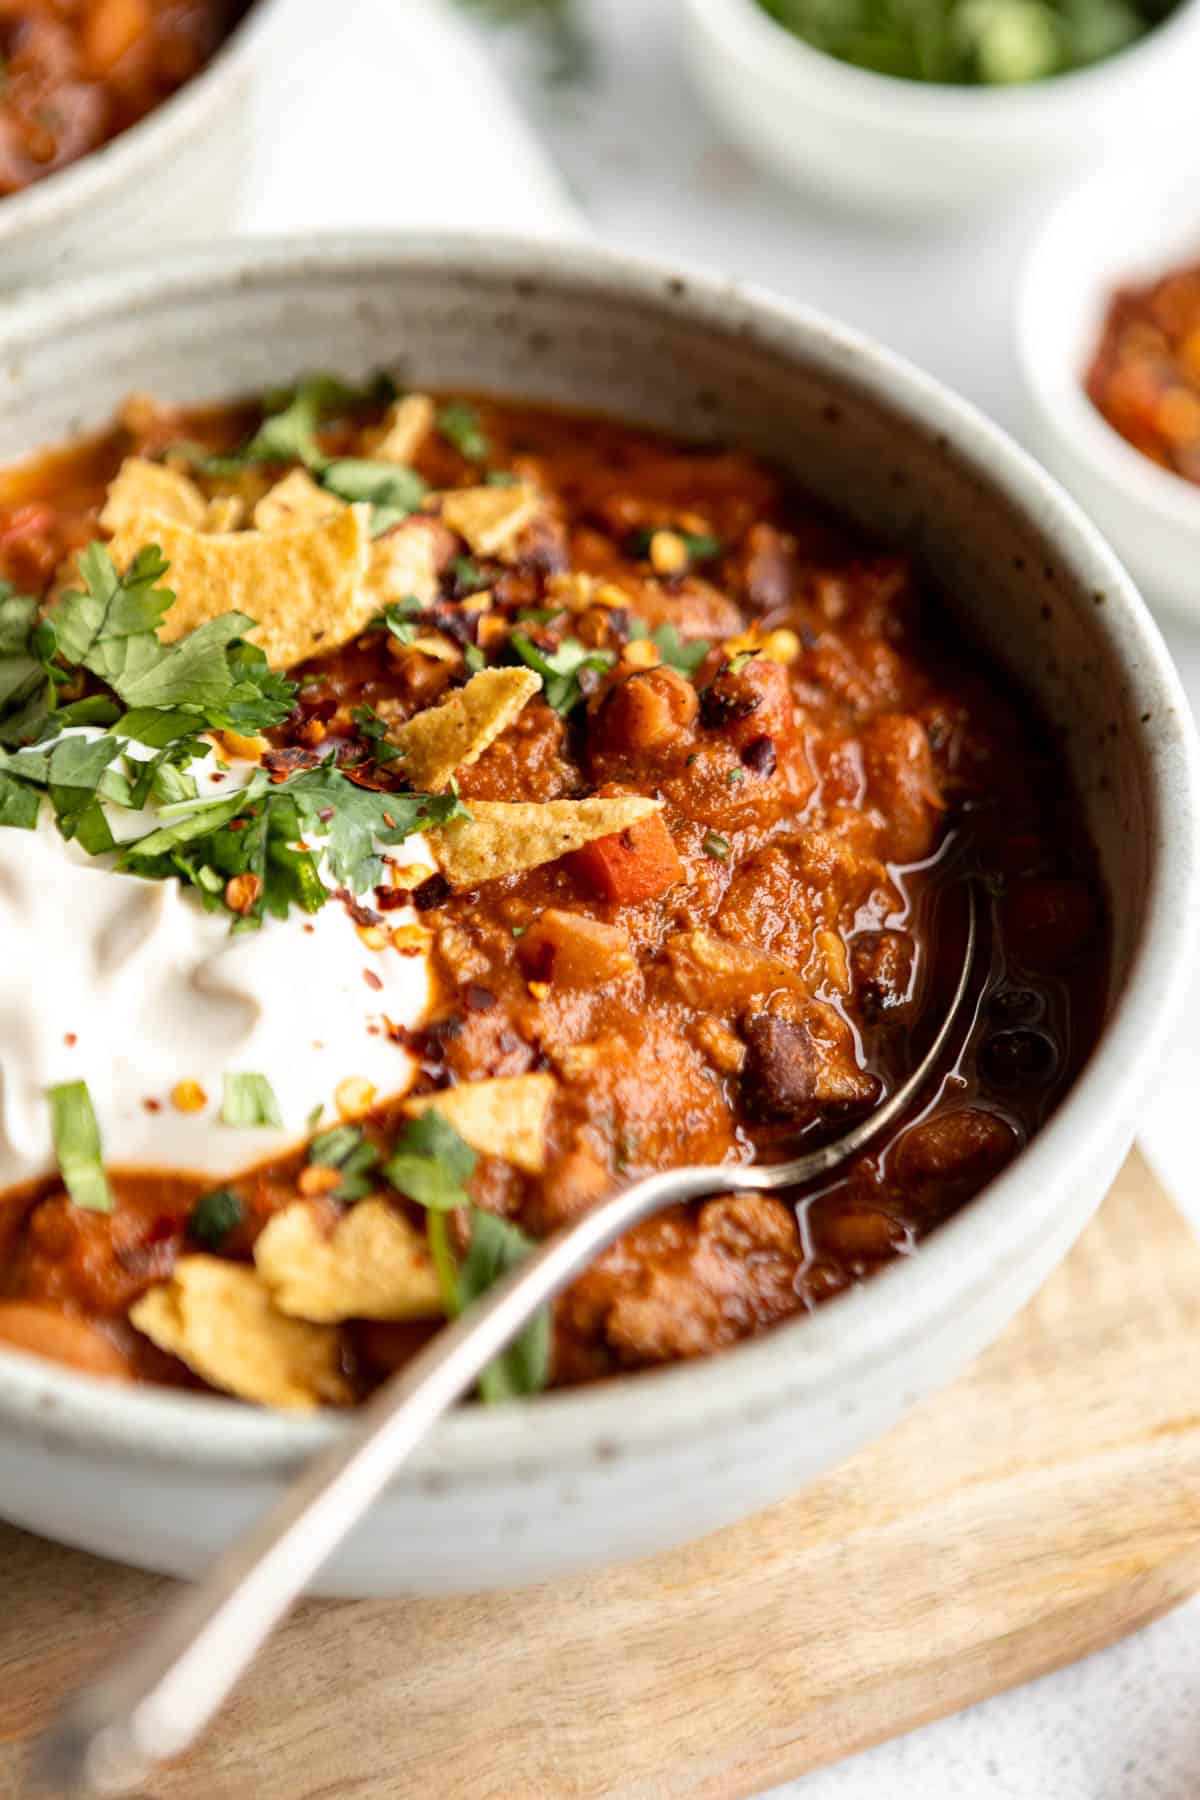 up close of the gluten free chili with cilantro and a spoon on the side